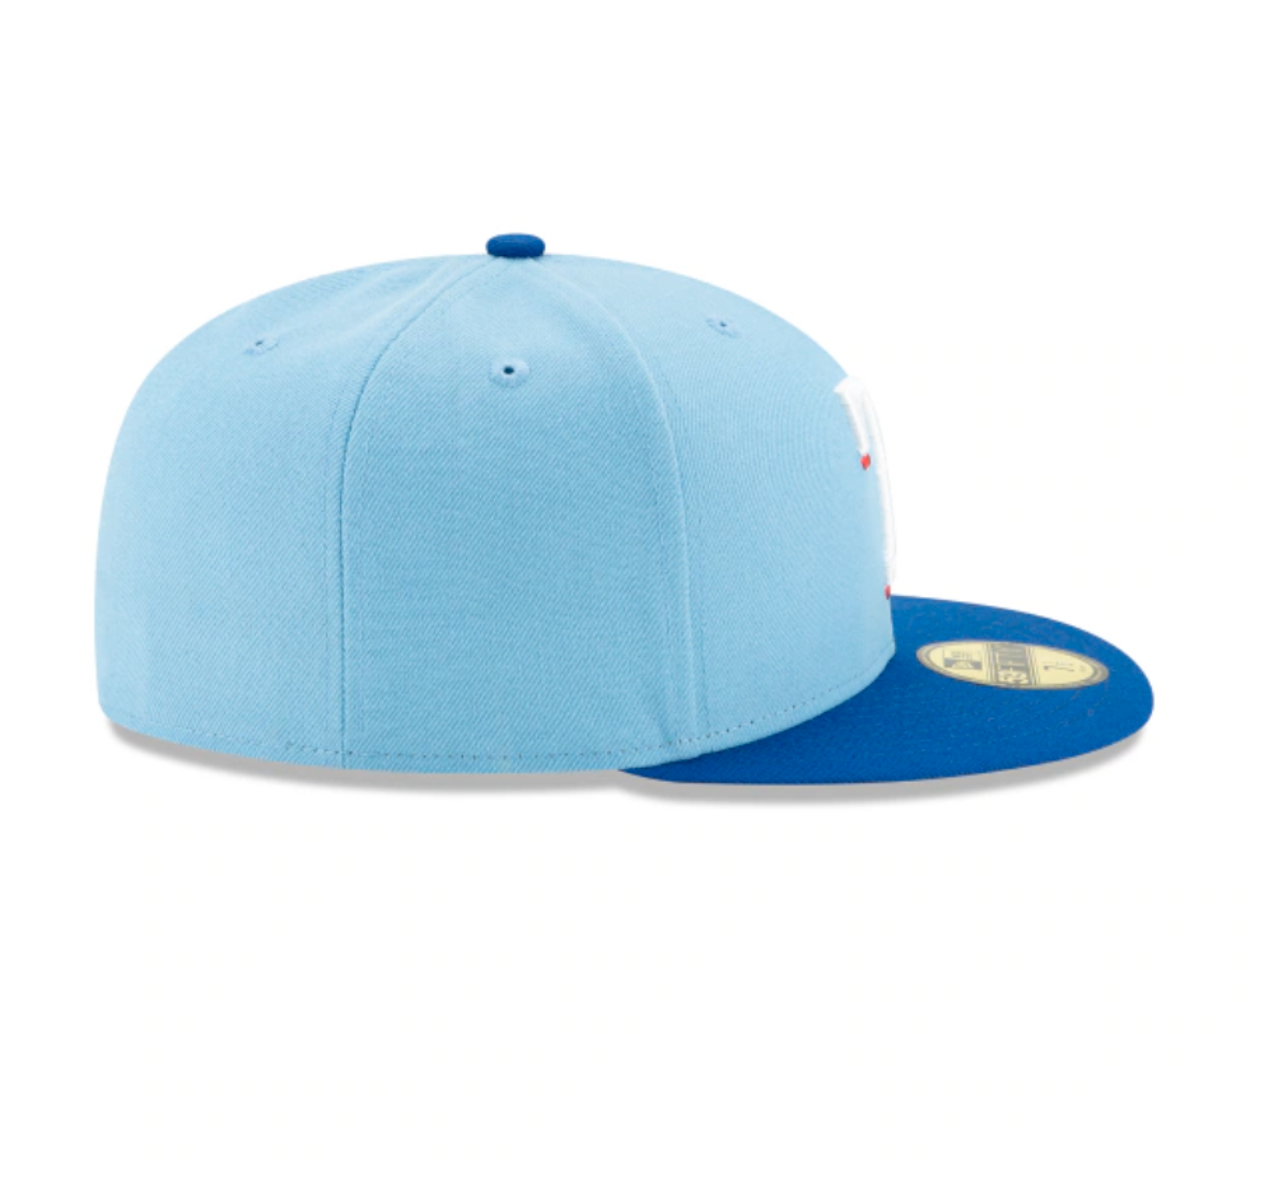 Men's Texas Rangers New Era Royal Authentic Collection On-Field